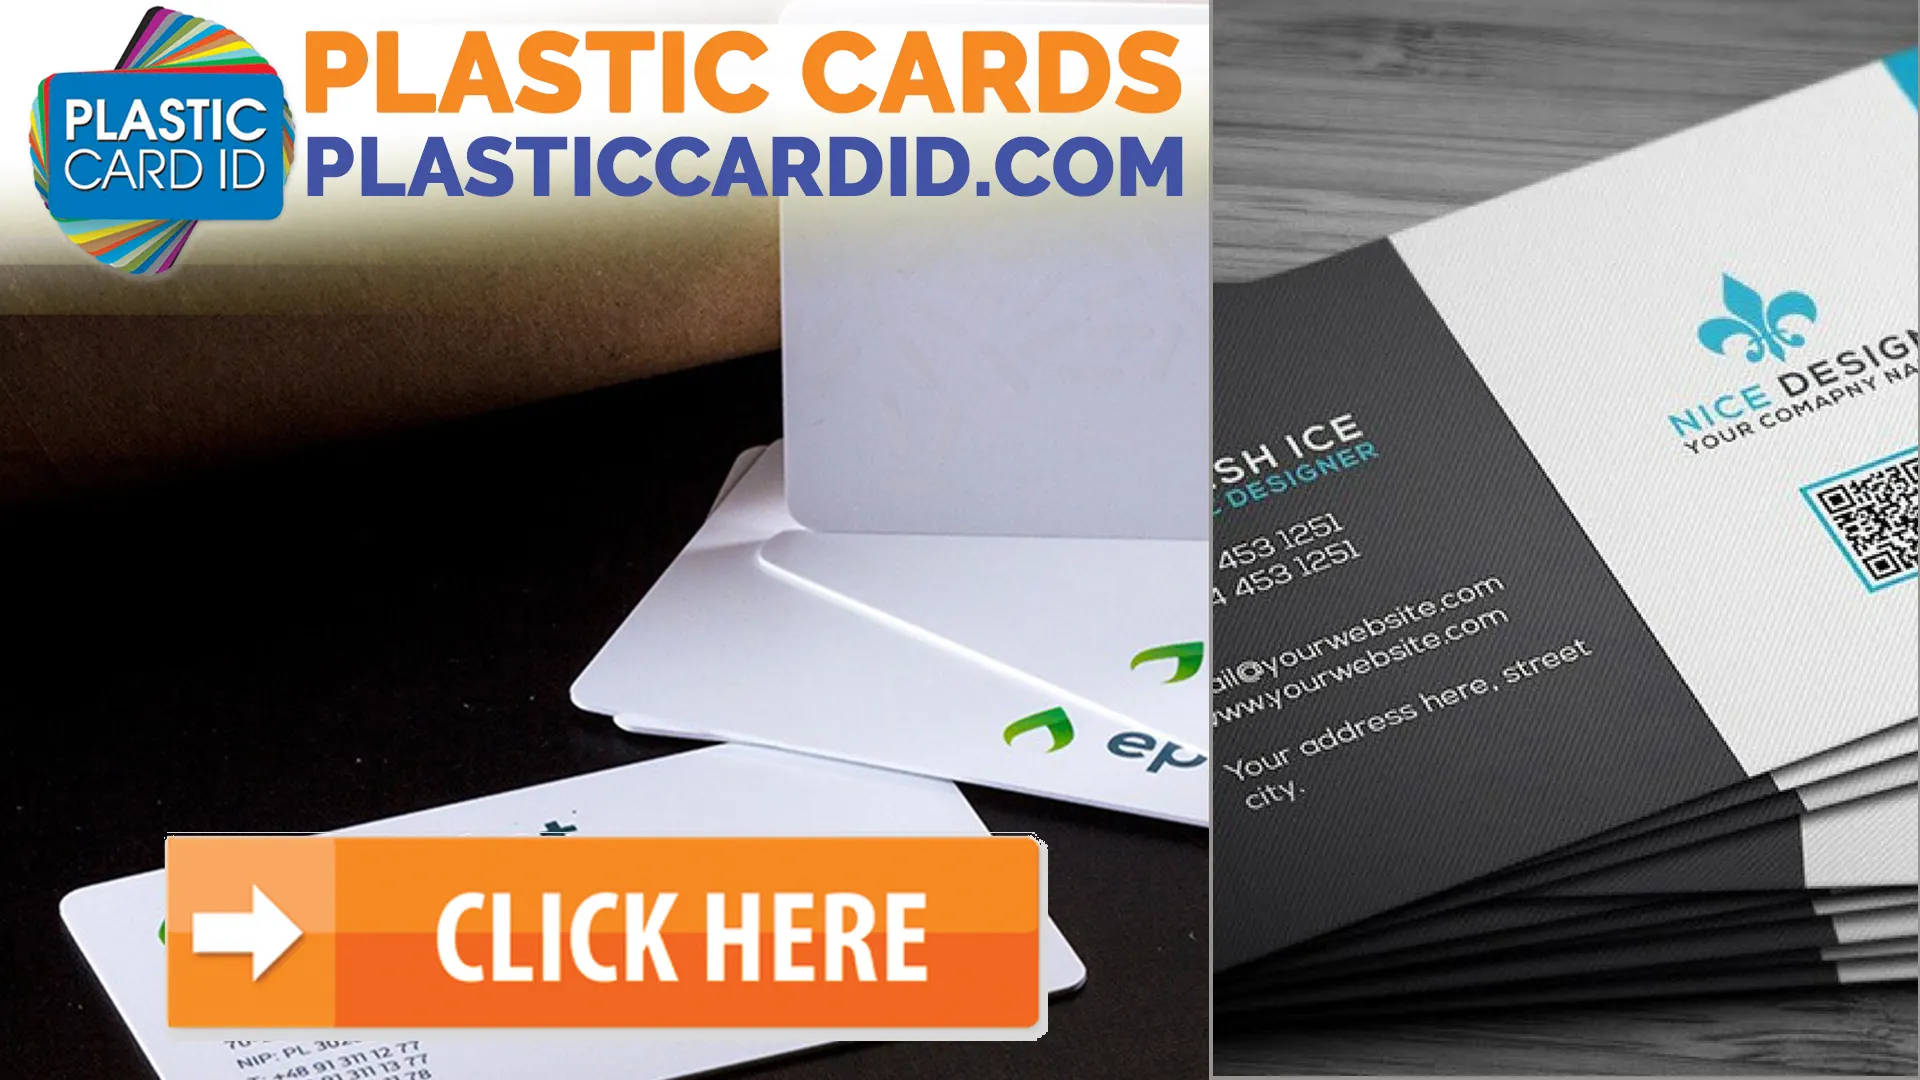 Welcome to Our World of Customized Plastic Card Design